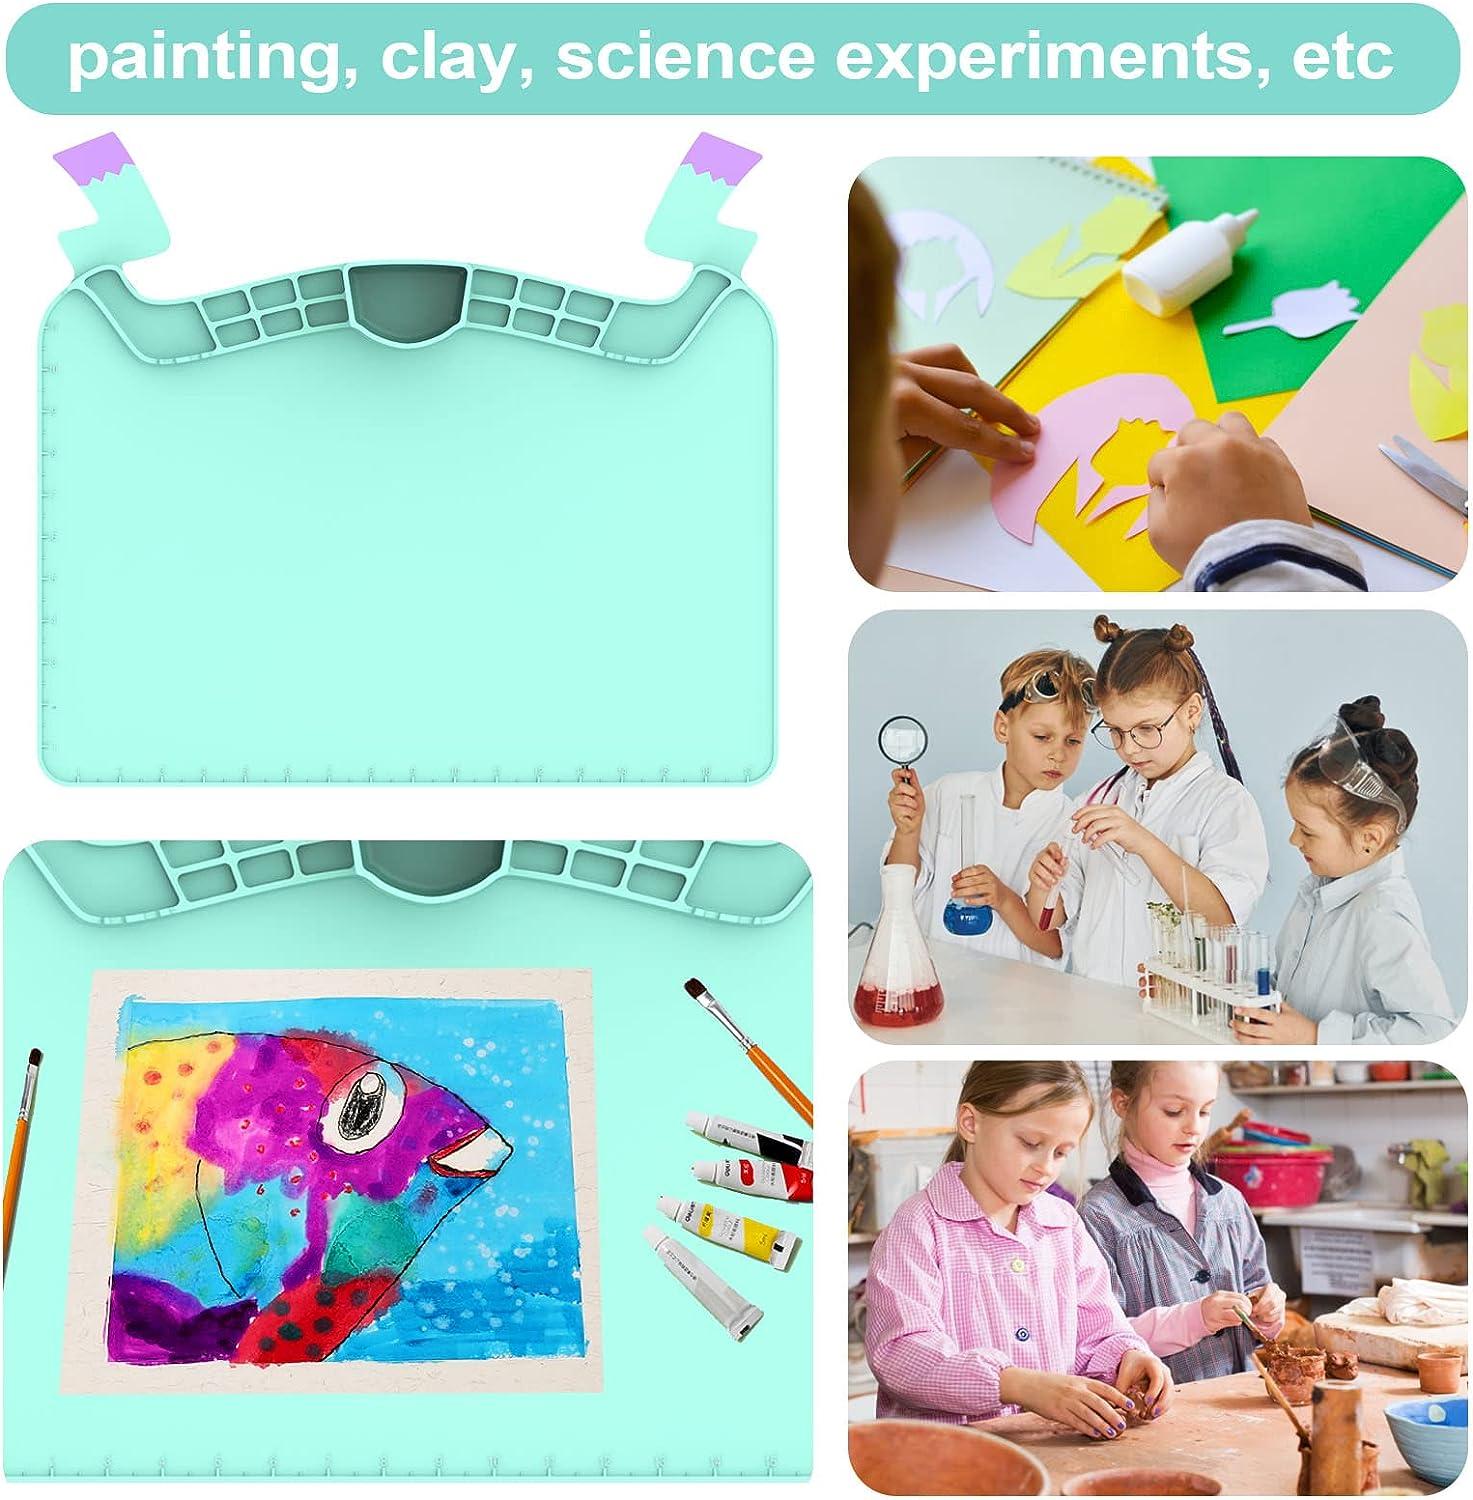 AWOKE Silicone Art Mat - 17.7 X15.7 Silicone Paint Mat With 1 Water Cup for  Kids - The Artist Mat has 12 Color Dividers - 2 Large Paint Dividers (Blue)  Lake Blue 17.7X15.7